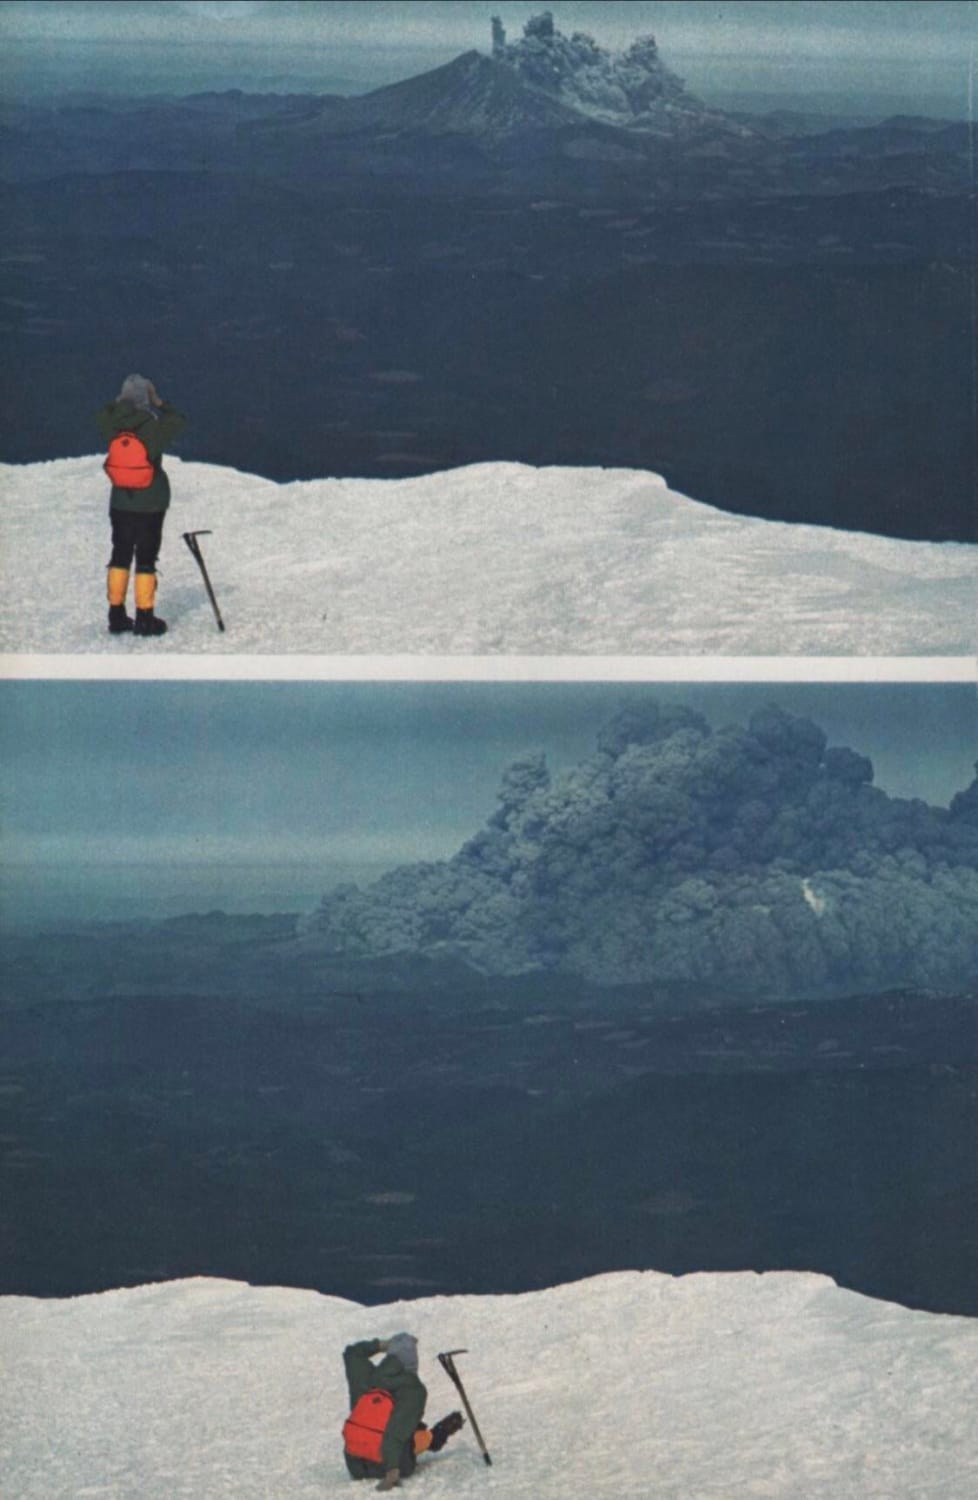 40 Years Ago Today. a hiker on Mt Adams (37 miles [60 km]) is knocked on her ass by the shockwave of the Eruption of Mt St. Helens.